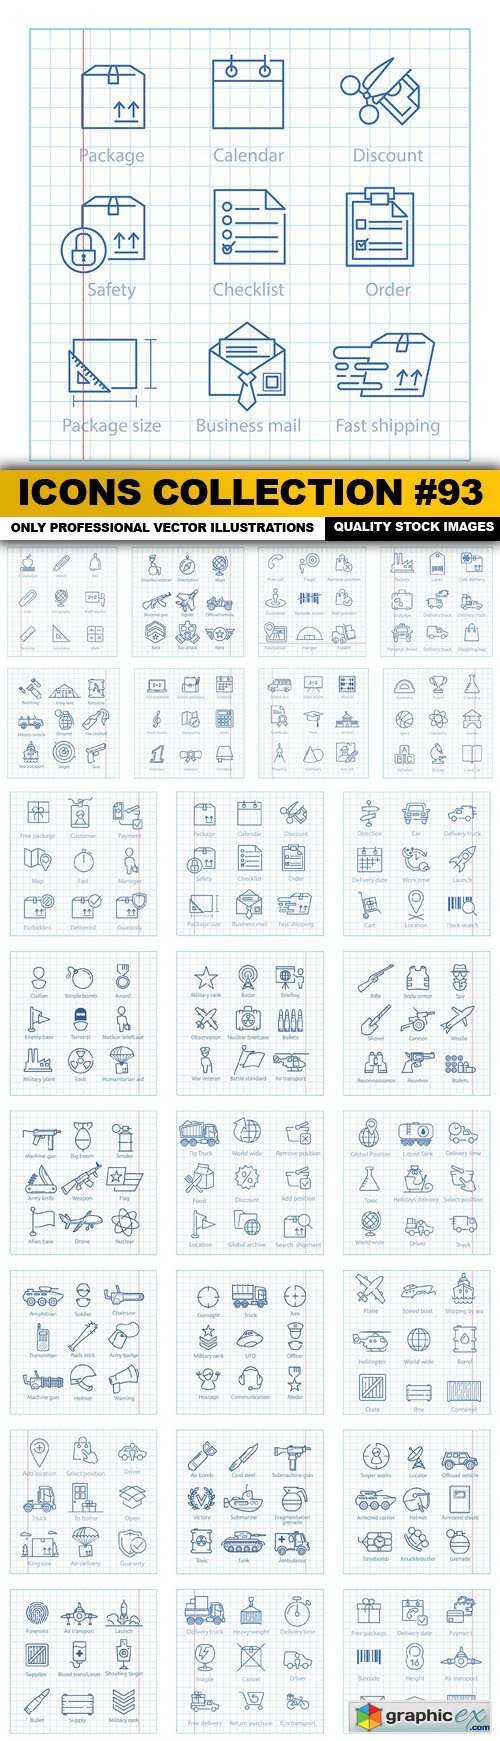 Icons Collection #93